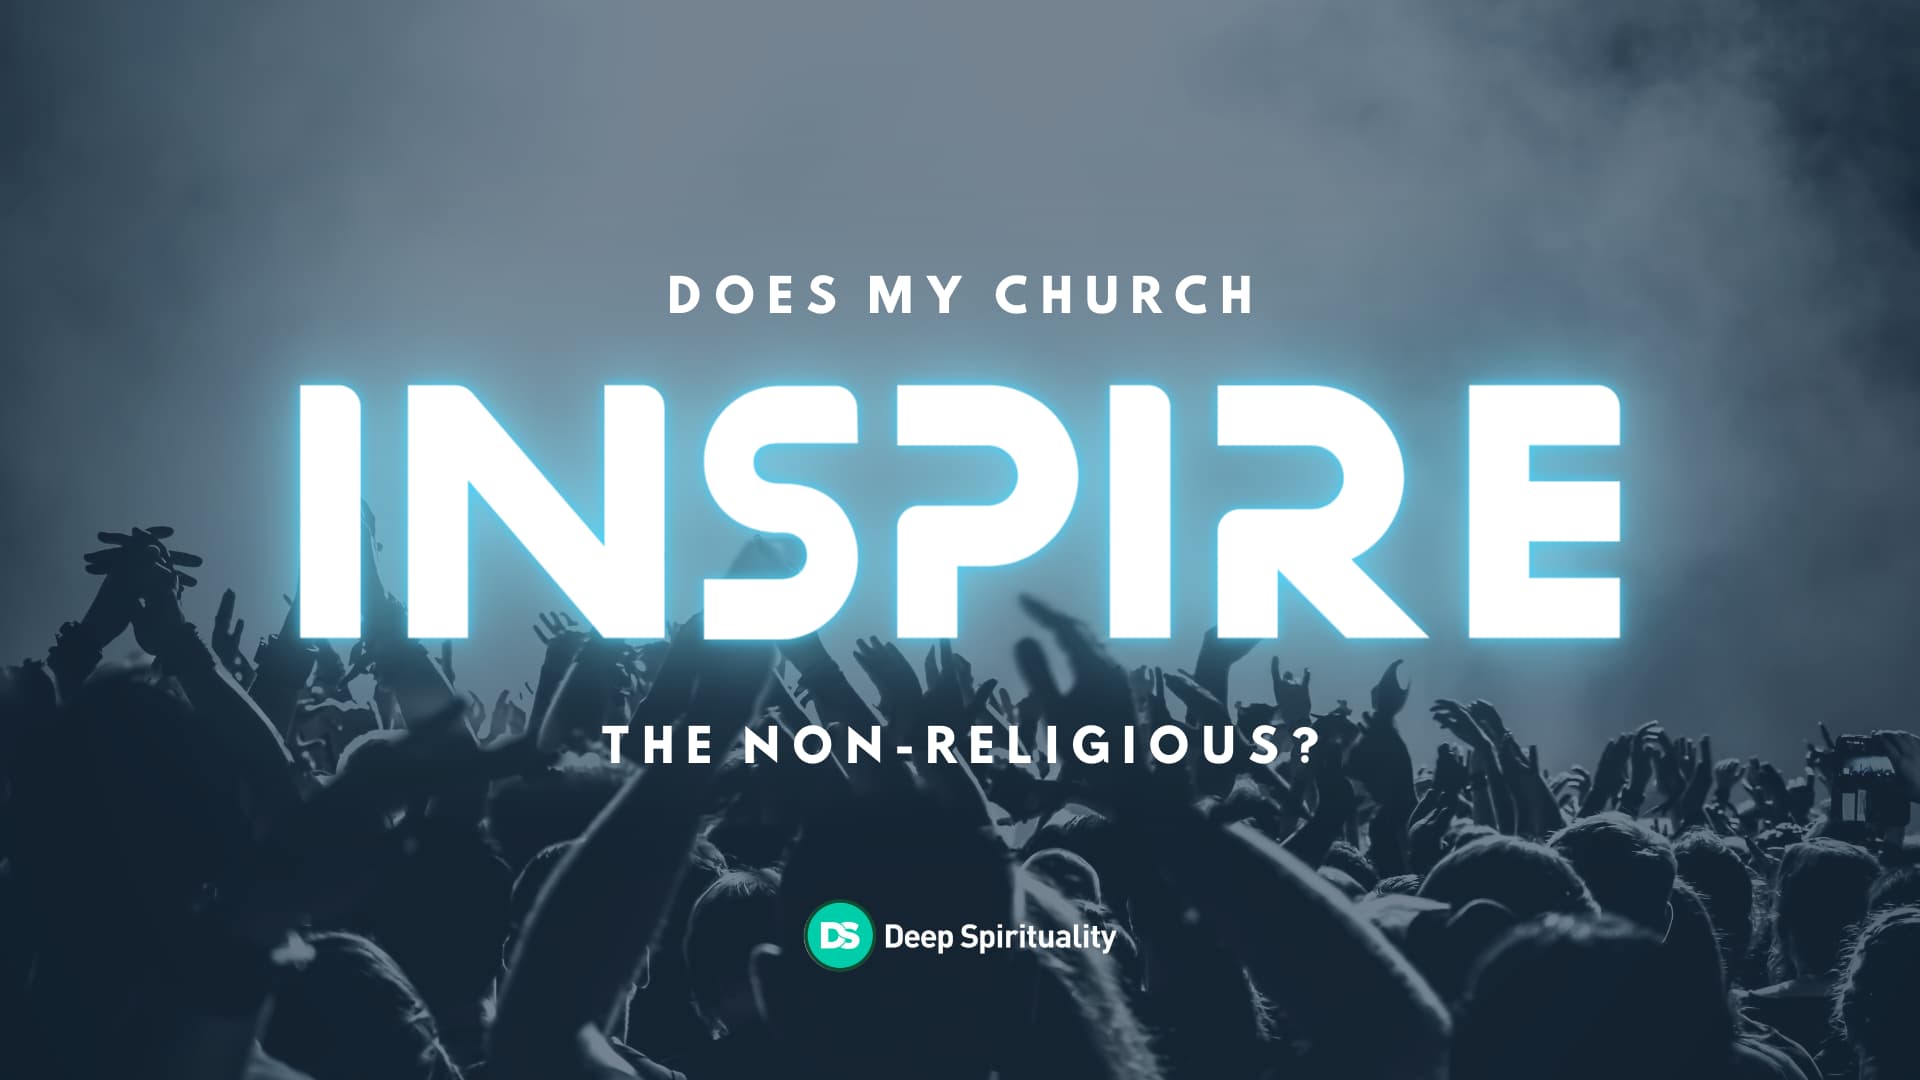 Does My Church Inspire the Non-Religious? 2